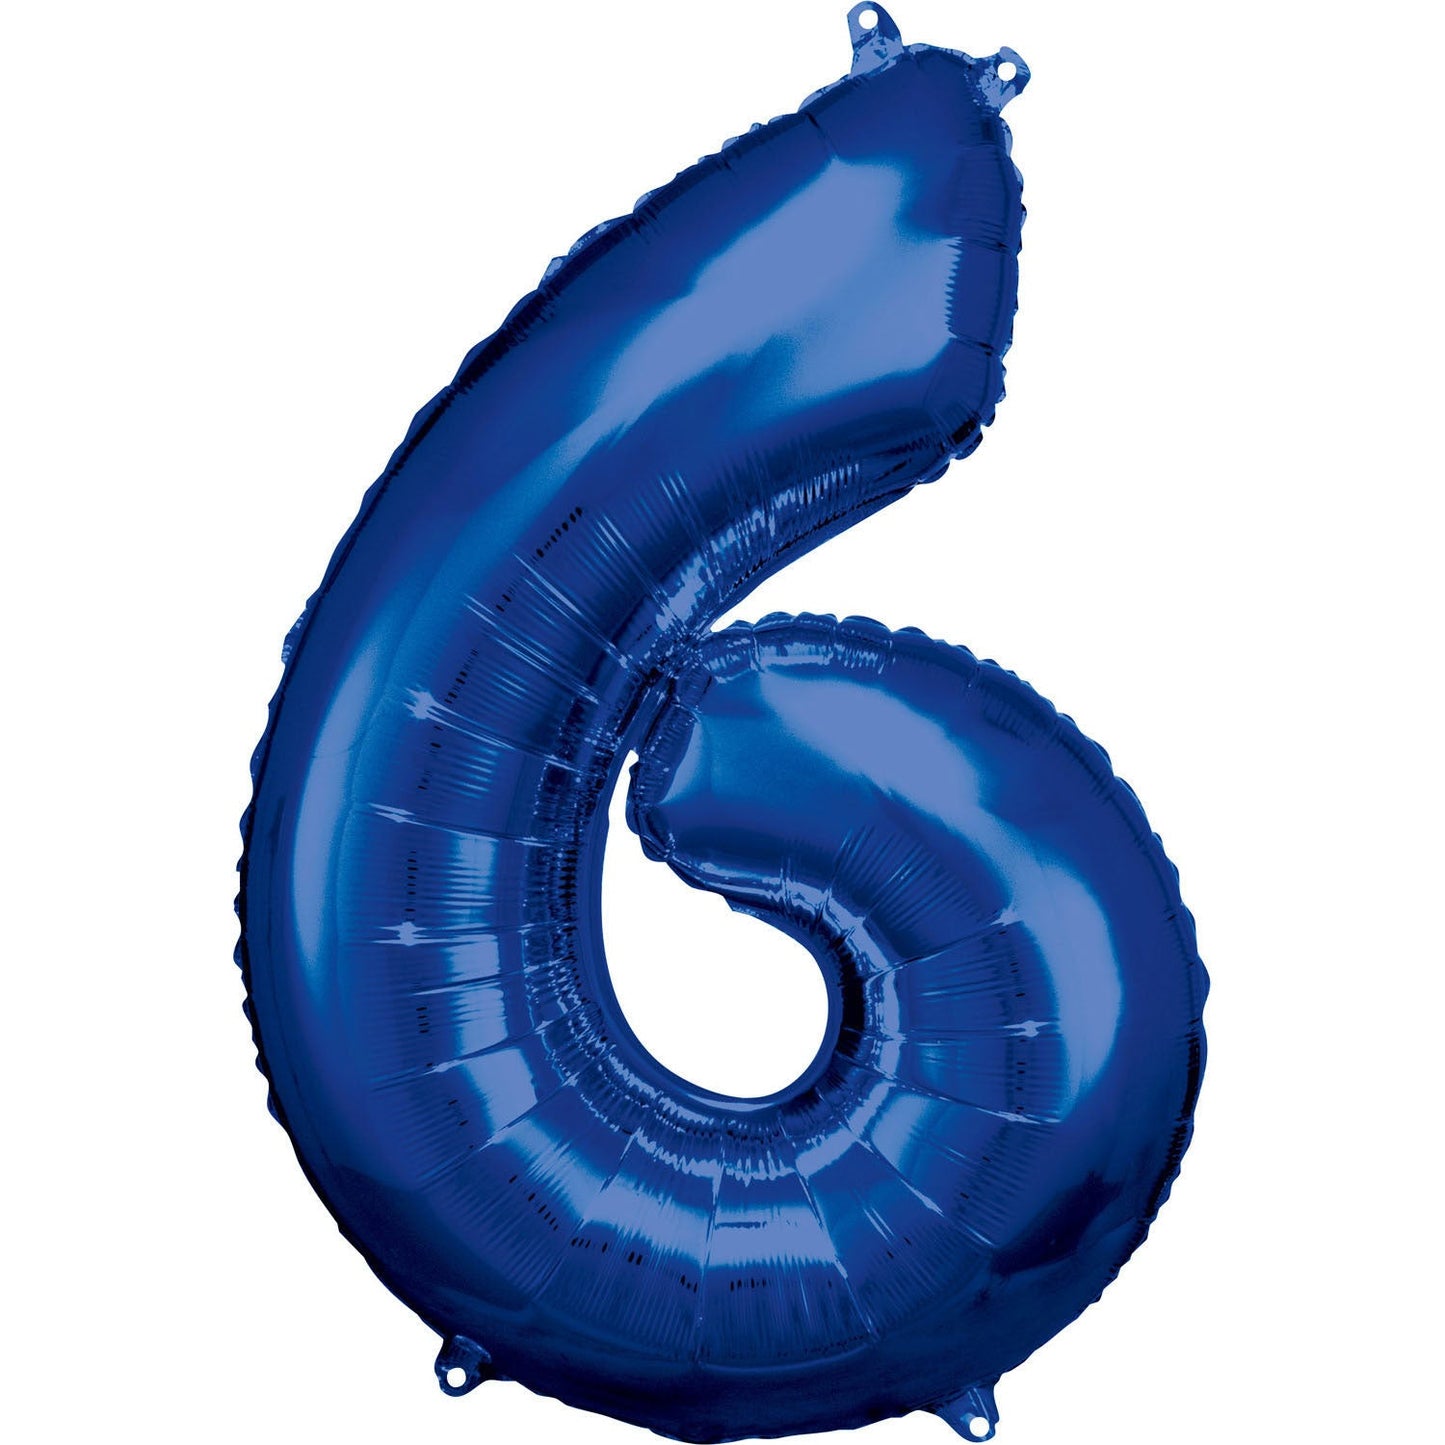 Blue Supershape Number 6 Foil Balloon 88cm (34in) height by 55cm (21in) width Balloon is sold uninflated. Can be inflated with air or helium.